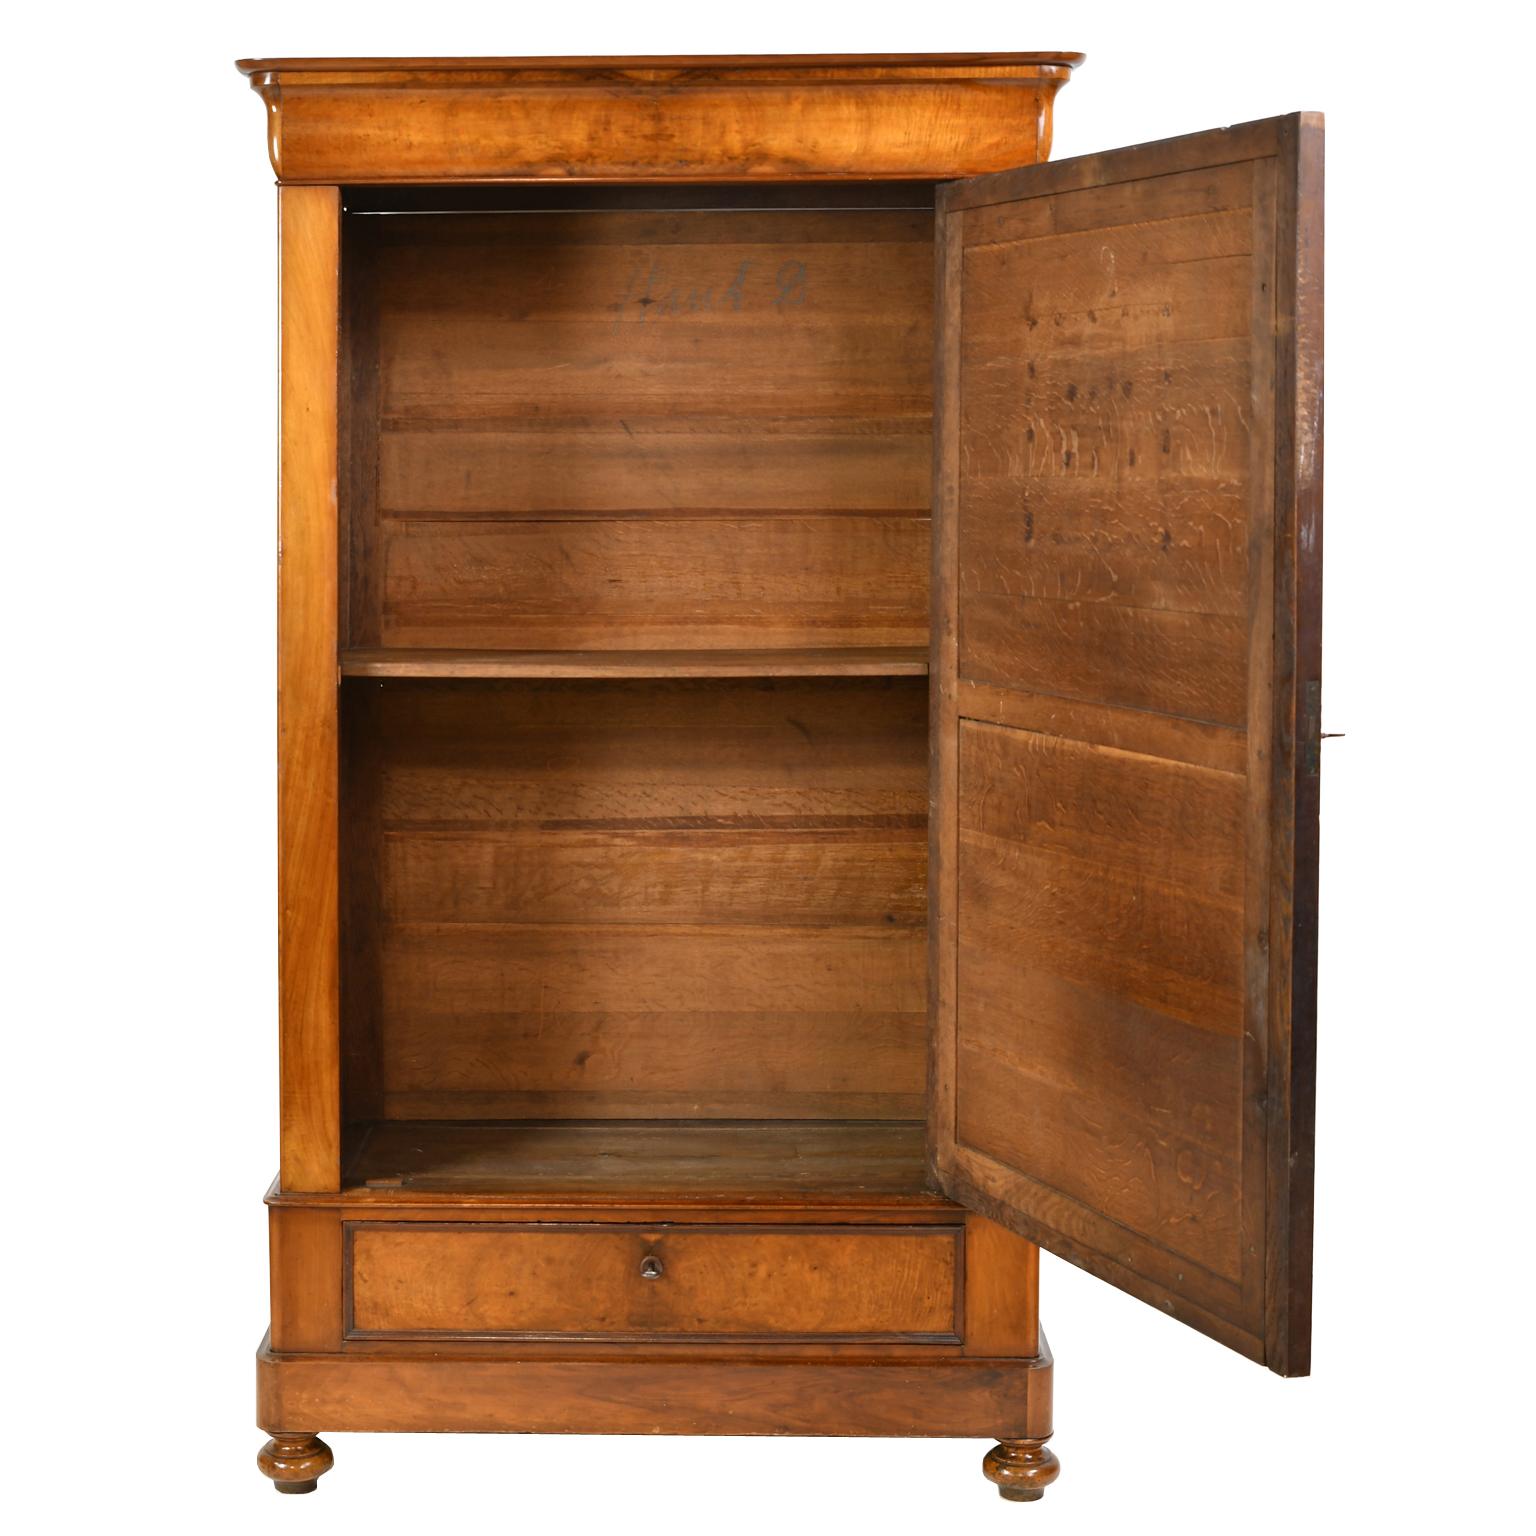 An exquisite French Louis Philippe armoire in walnut with one mirrored-door and bottom drawer. Interior offers one adjustable shelf (others may be added upon request). The grain of the walnut has some beautiful figuring and the color is a medium